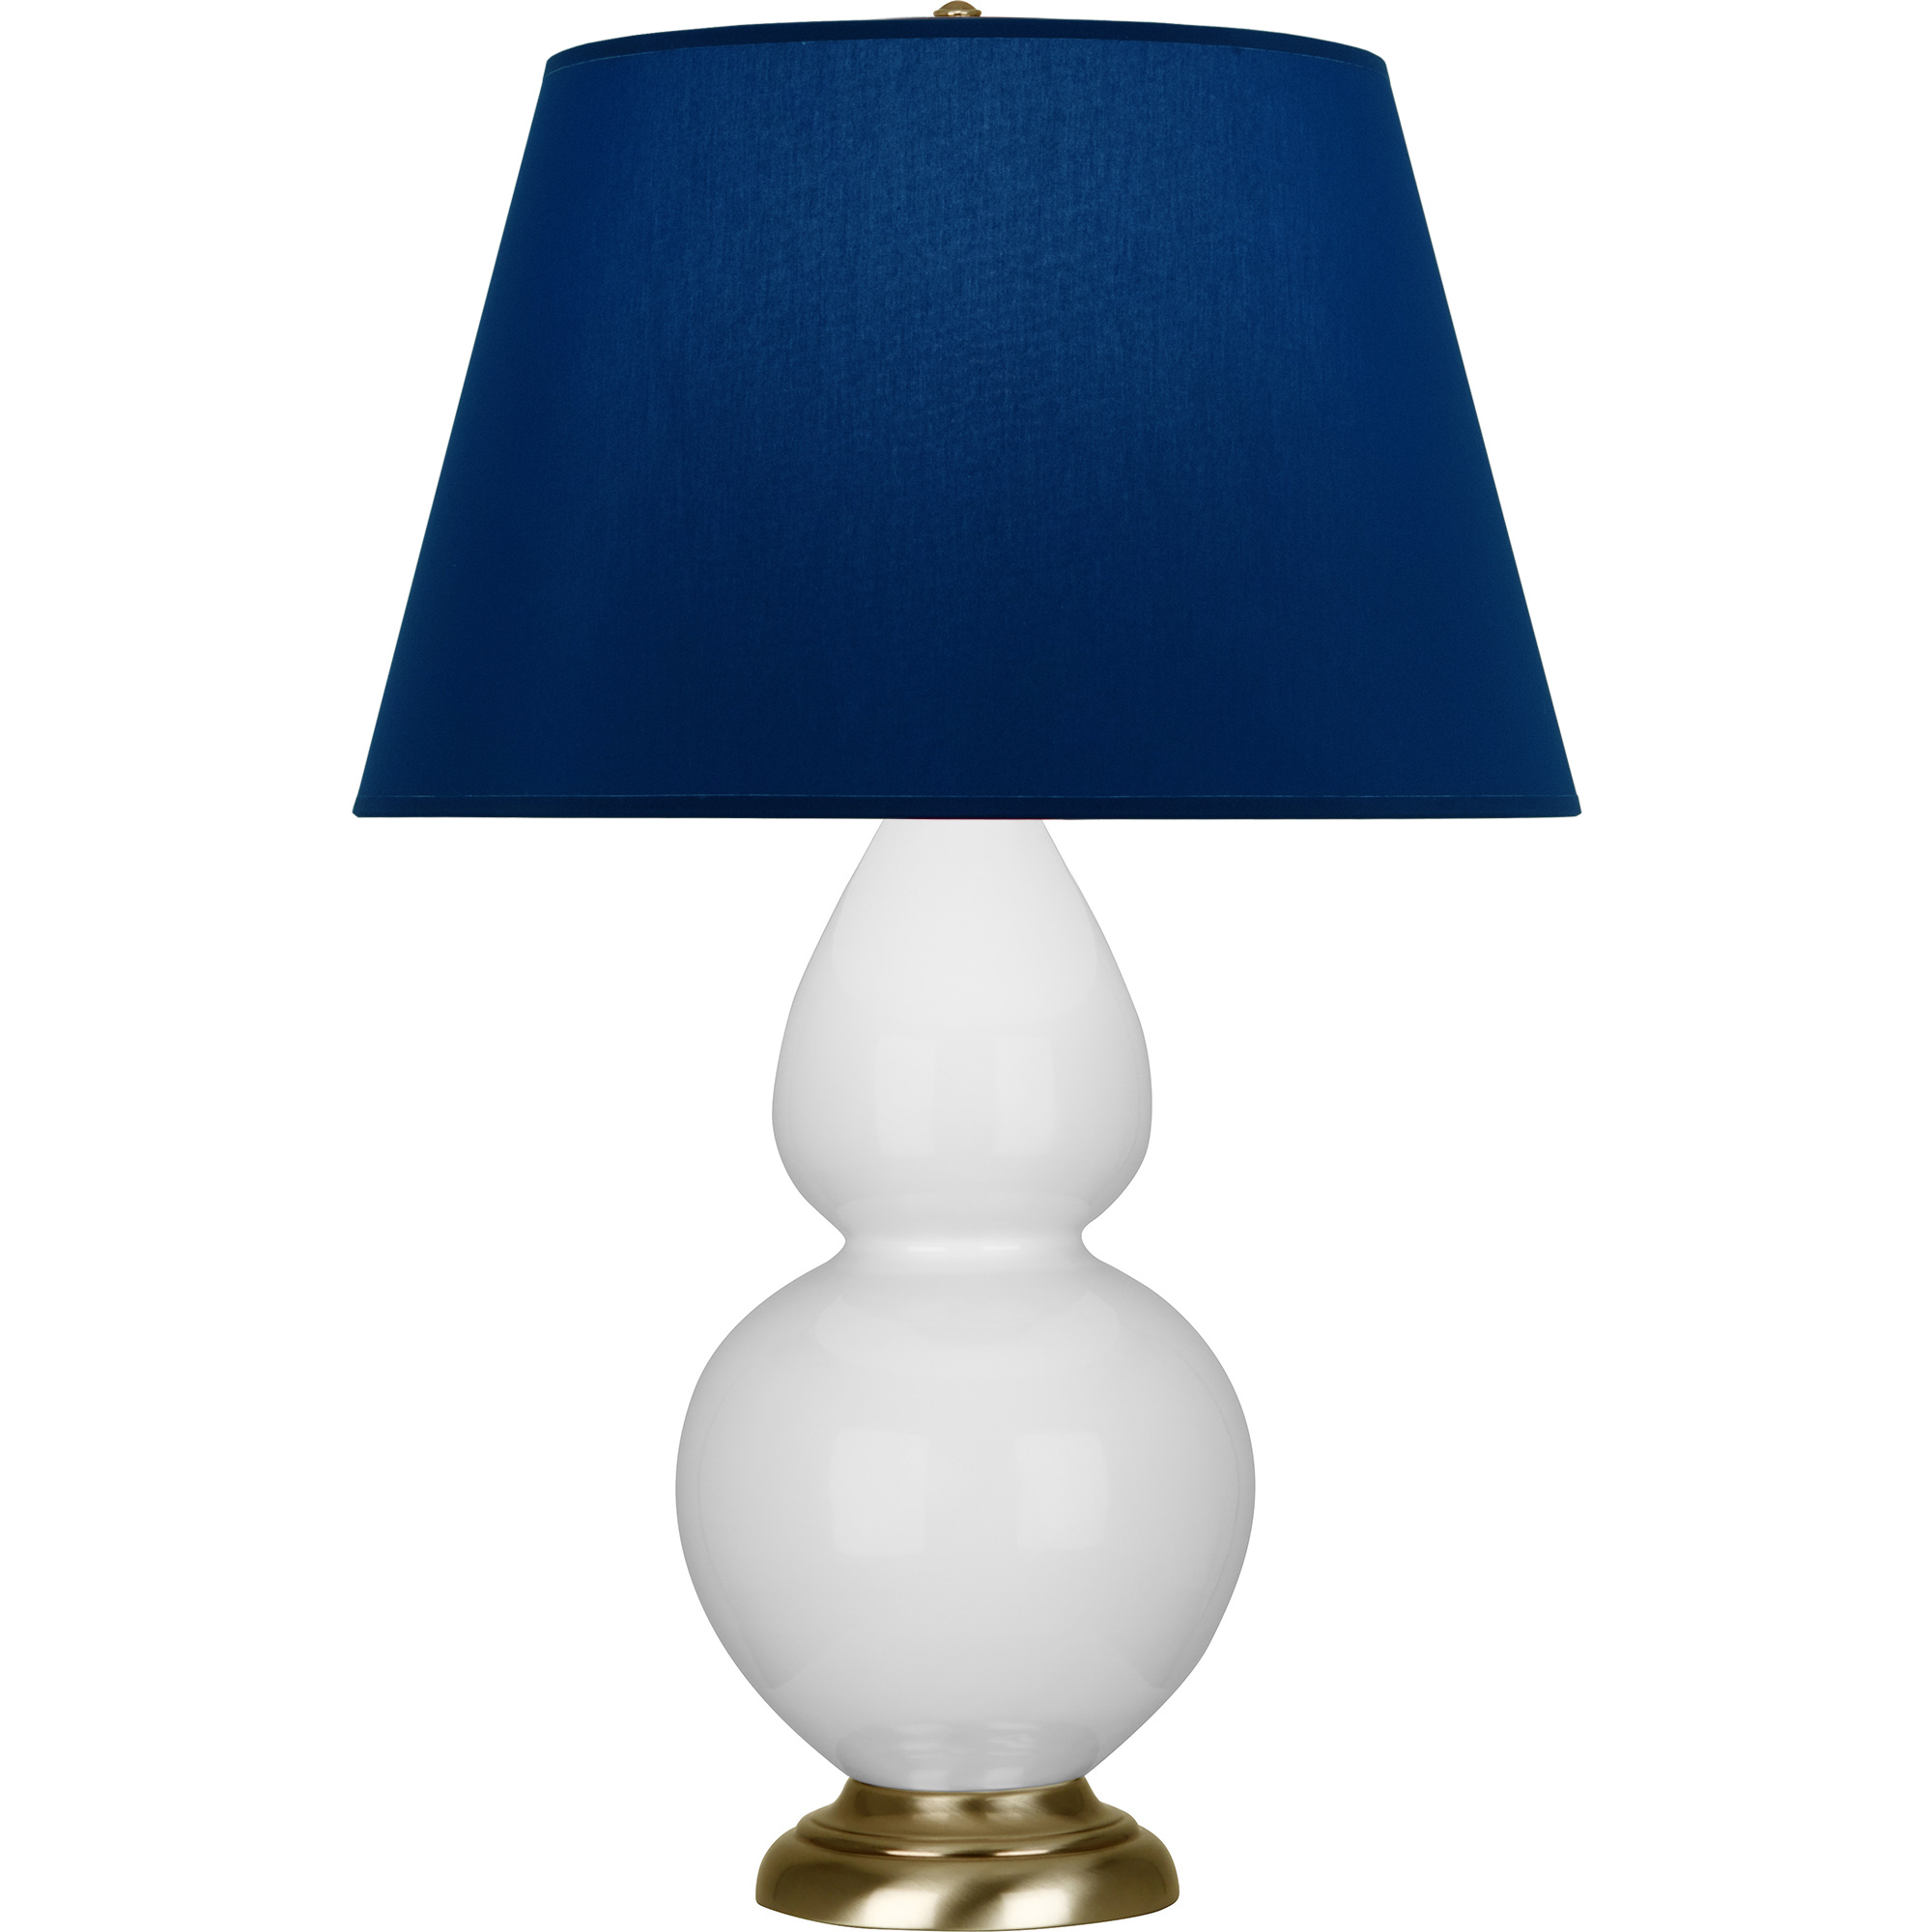 Double Gourd Table Lamp Style #DY20N